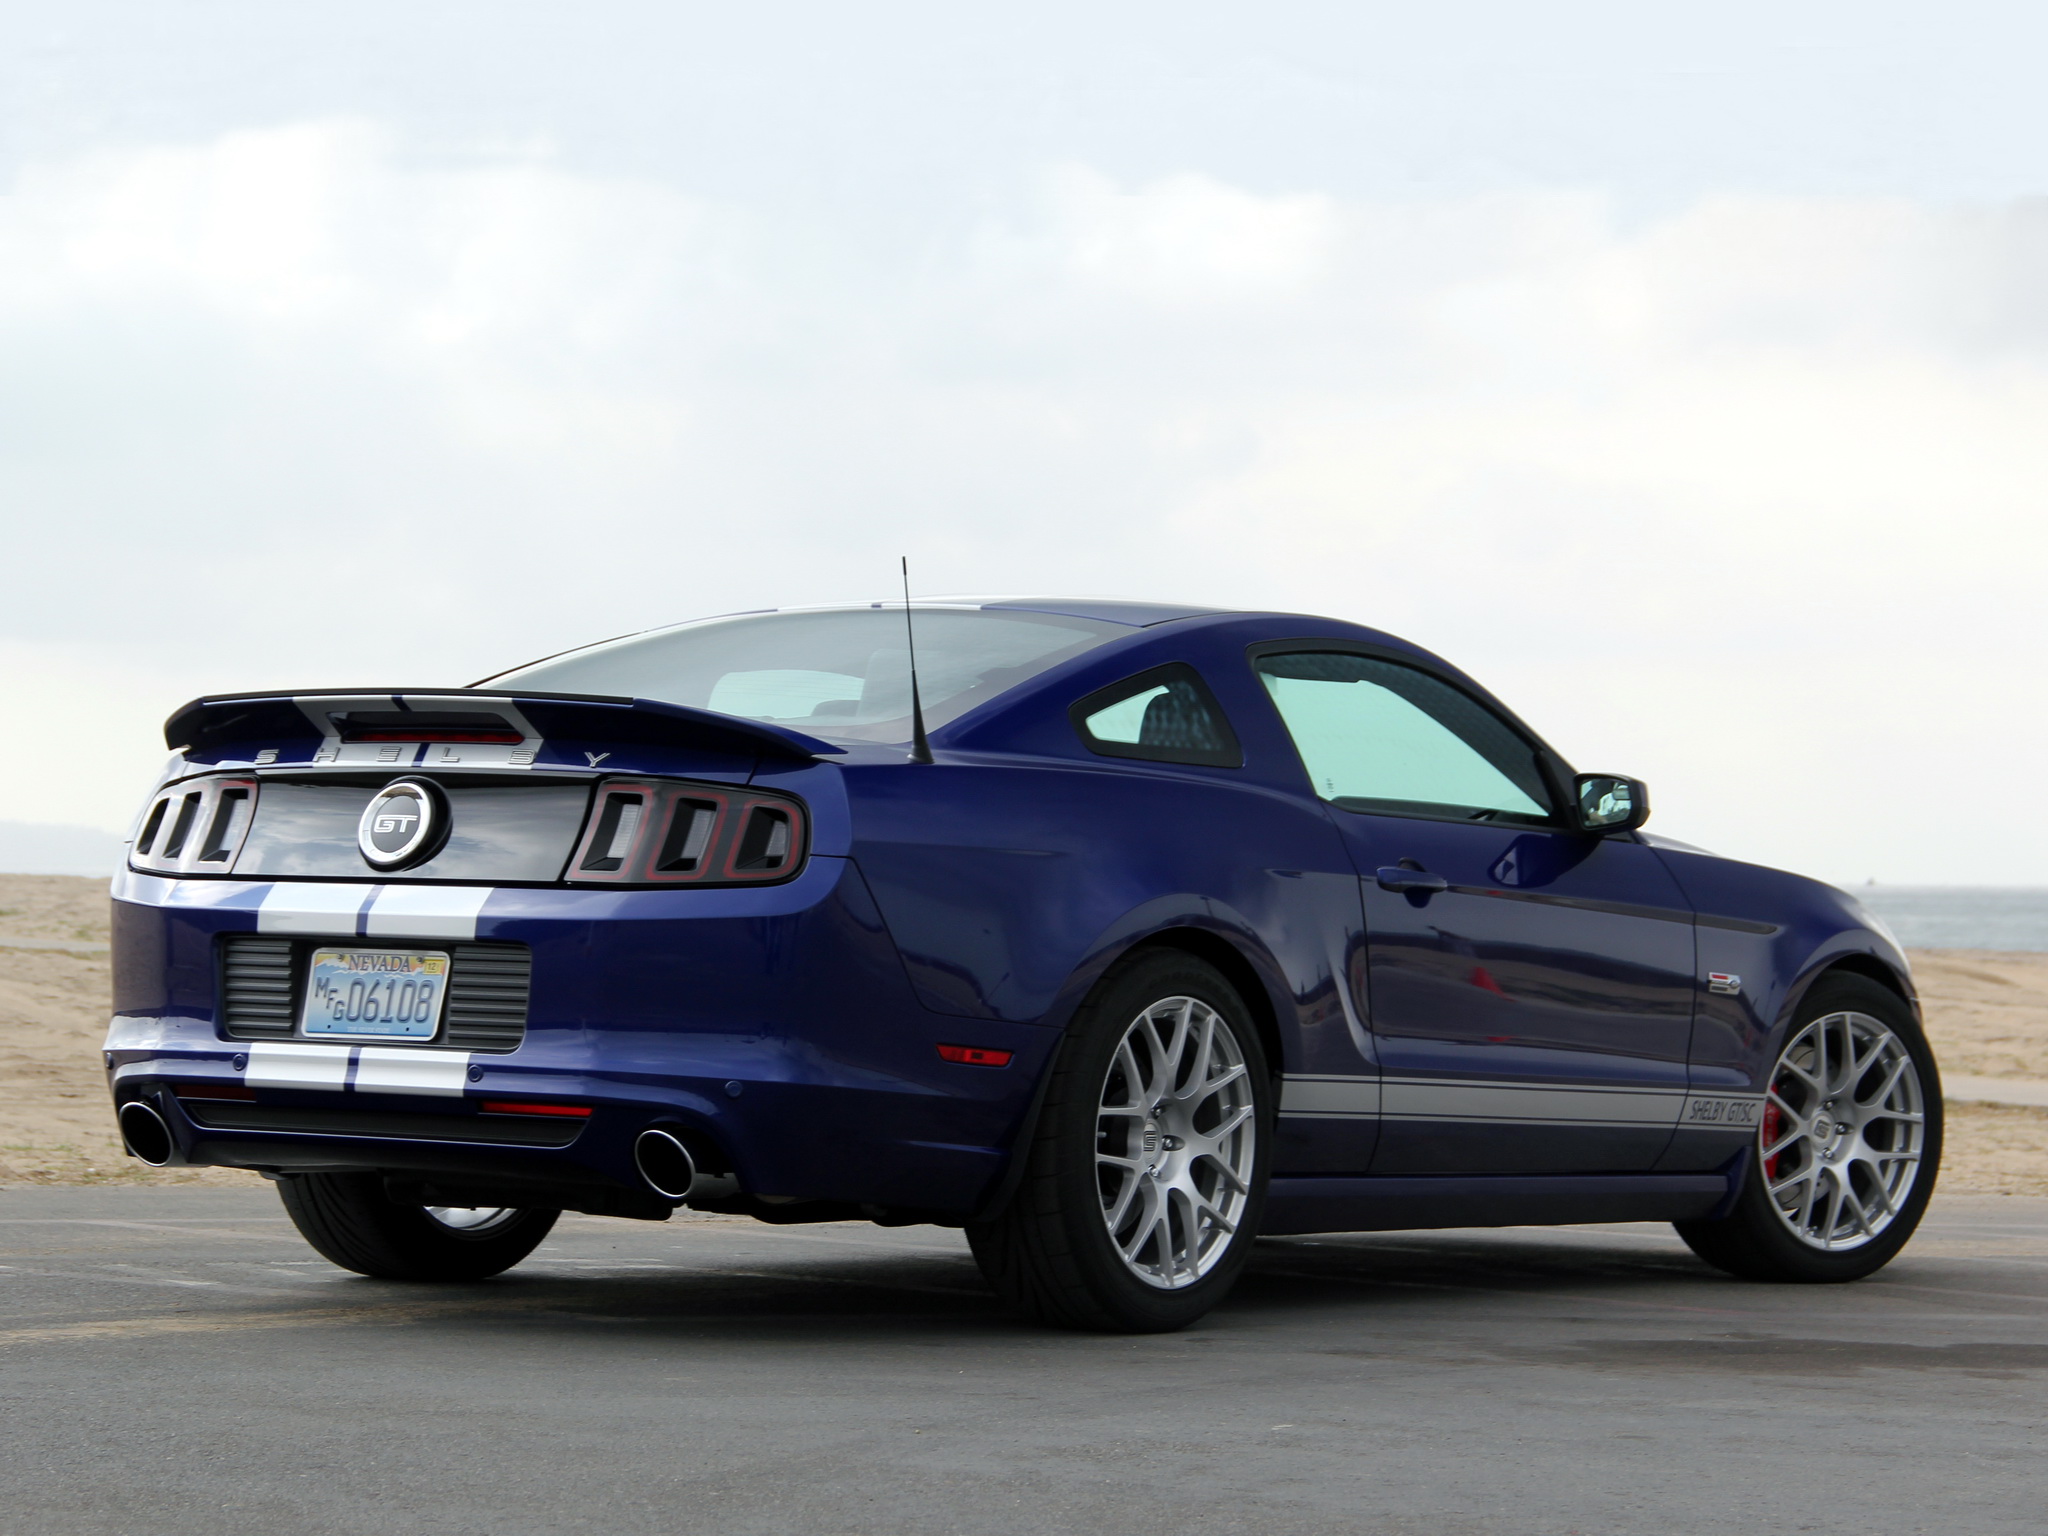 2014, Shelby, Ford, Mustang, Gt sc, Muscle, Fs Wallpaper